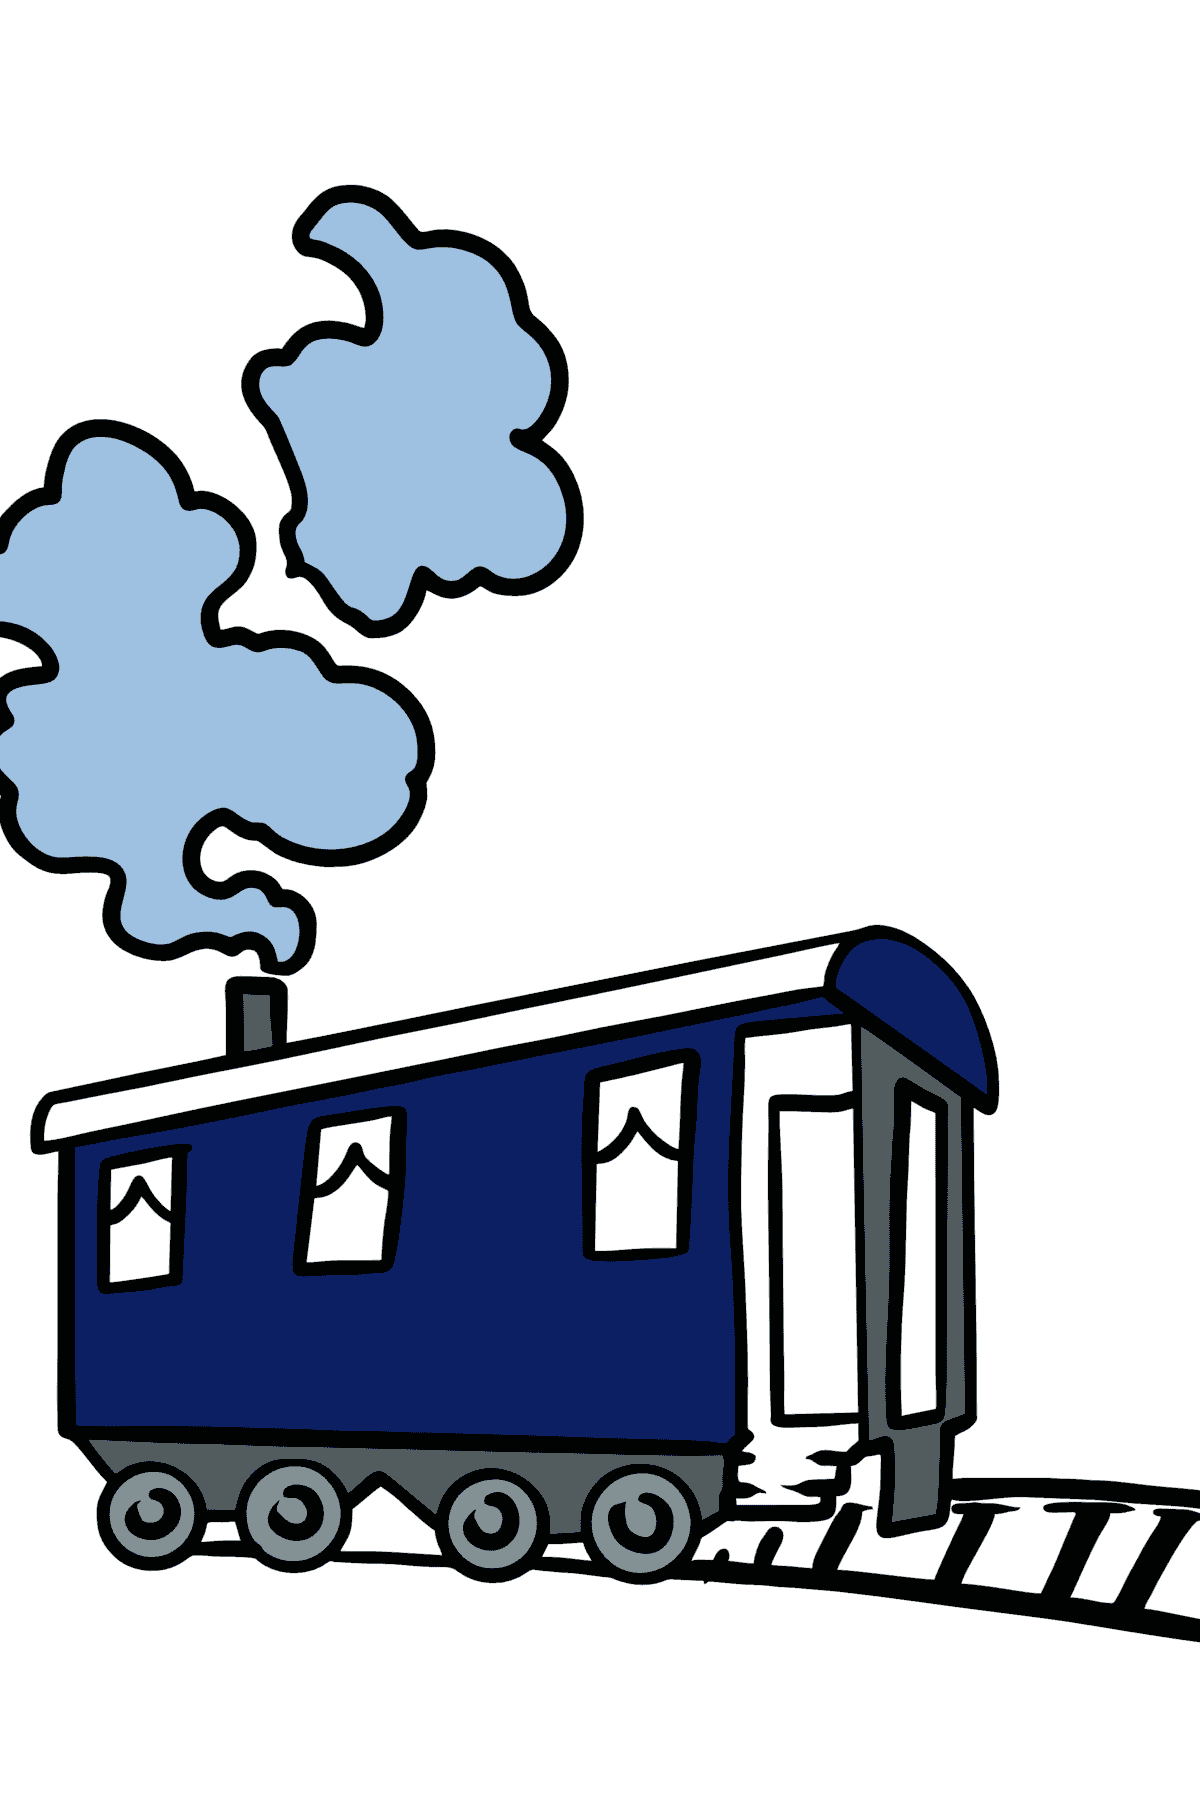 Railway coloring page - Coloring Pages for Kids